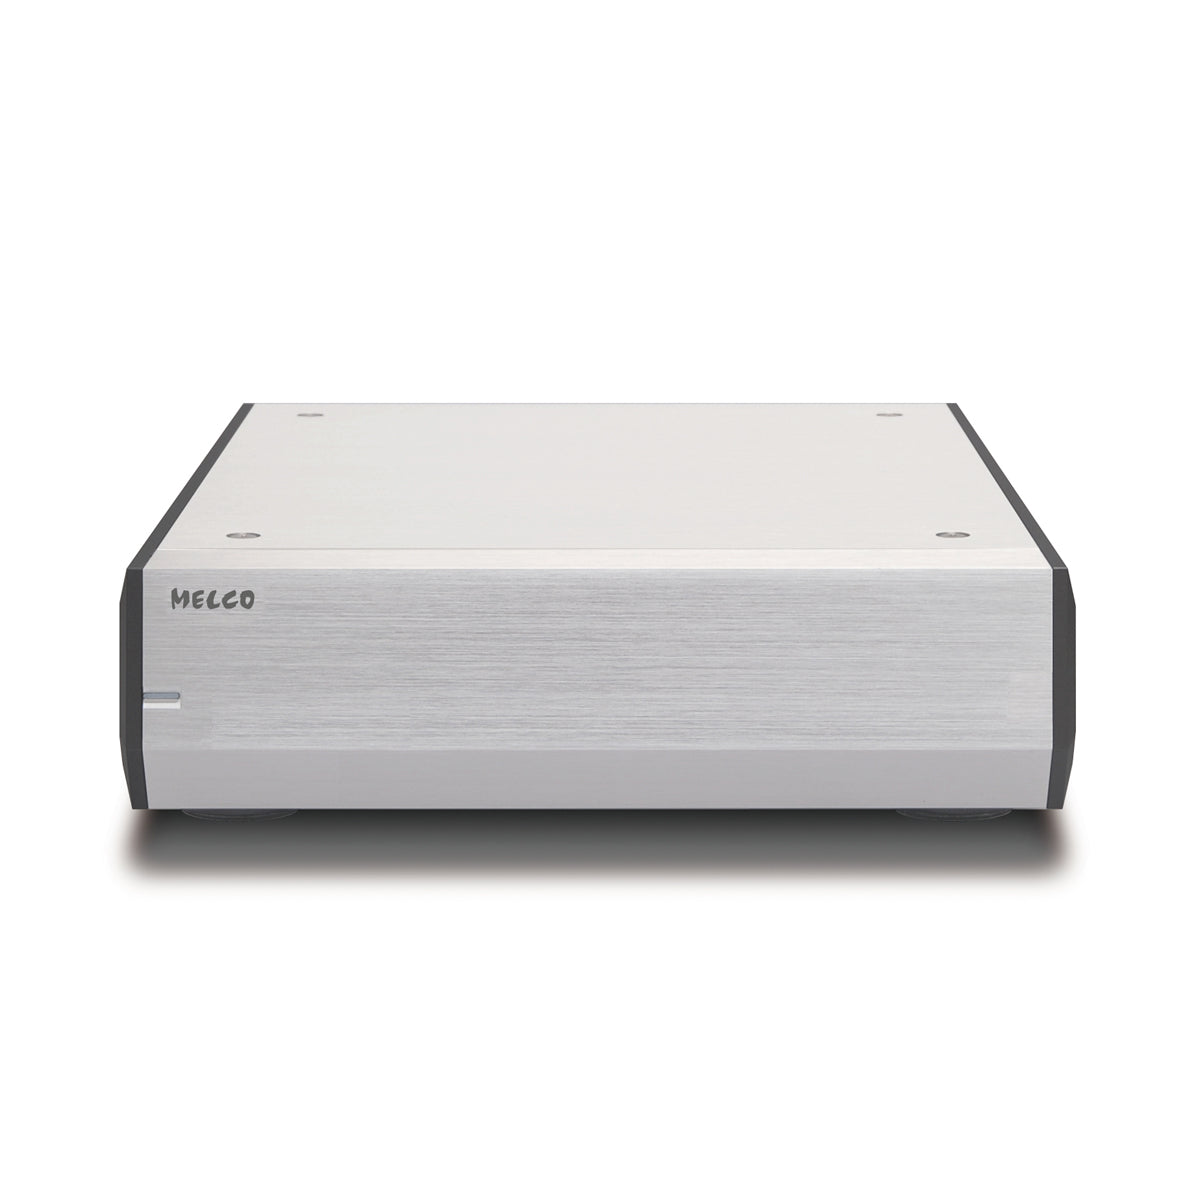 Melco Data Switch S100/2-C (new model) - The Audio Experts